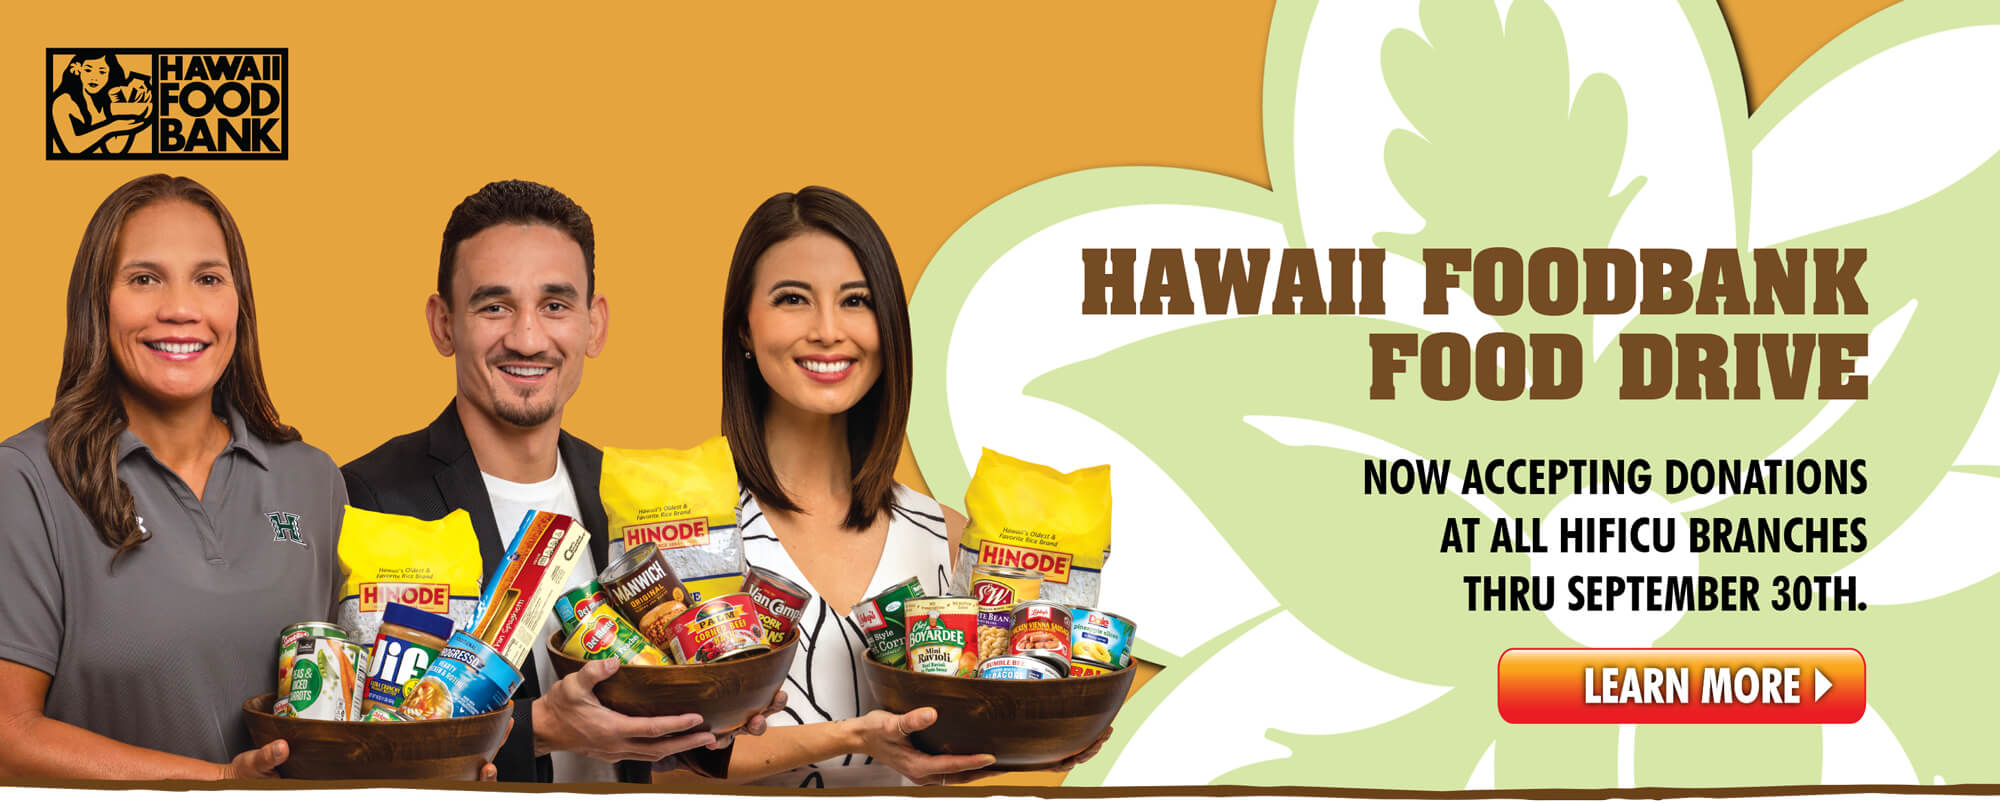 Nourish our ohana!  All HIFICU branches are now accepting food and monetary donations thru September 30th.  Mahalo for your generosity!